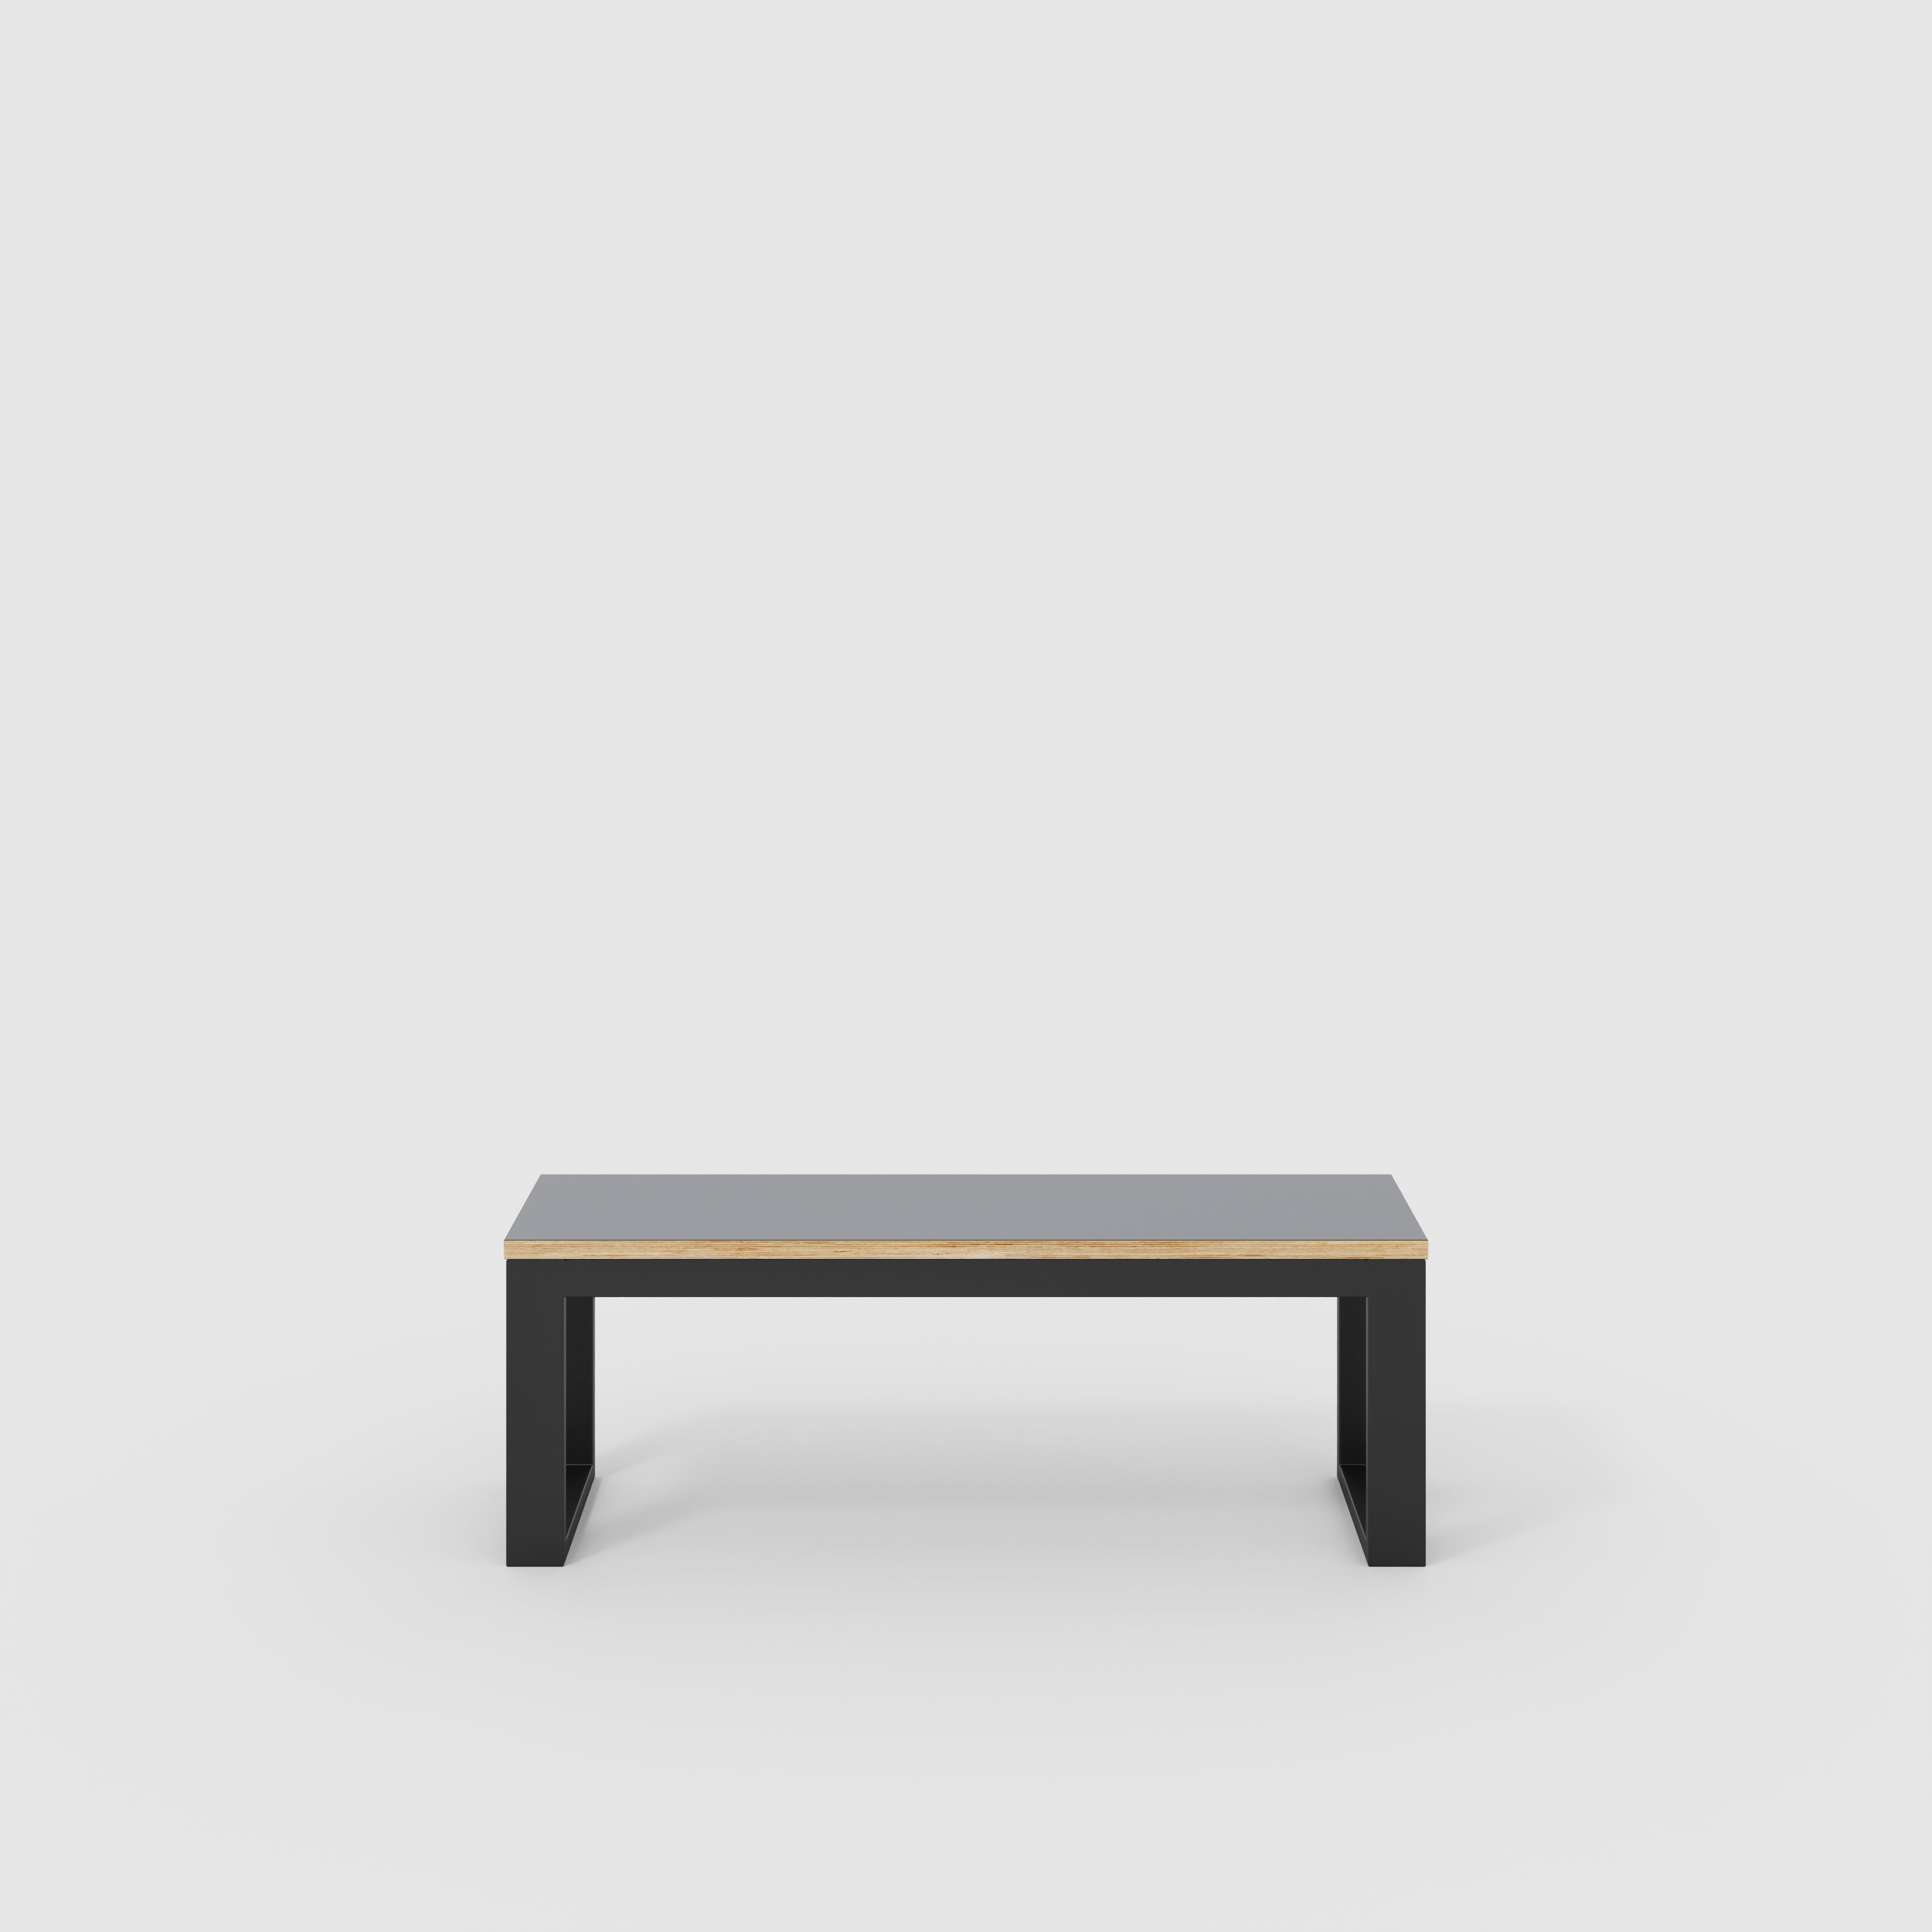 Bench Seat with Black Industrial Frame - Formica Tornado Grey - 1200(w) x 325(d)